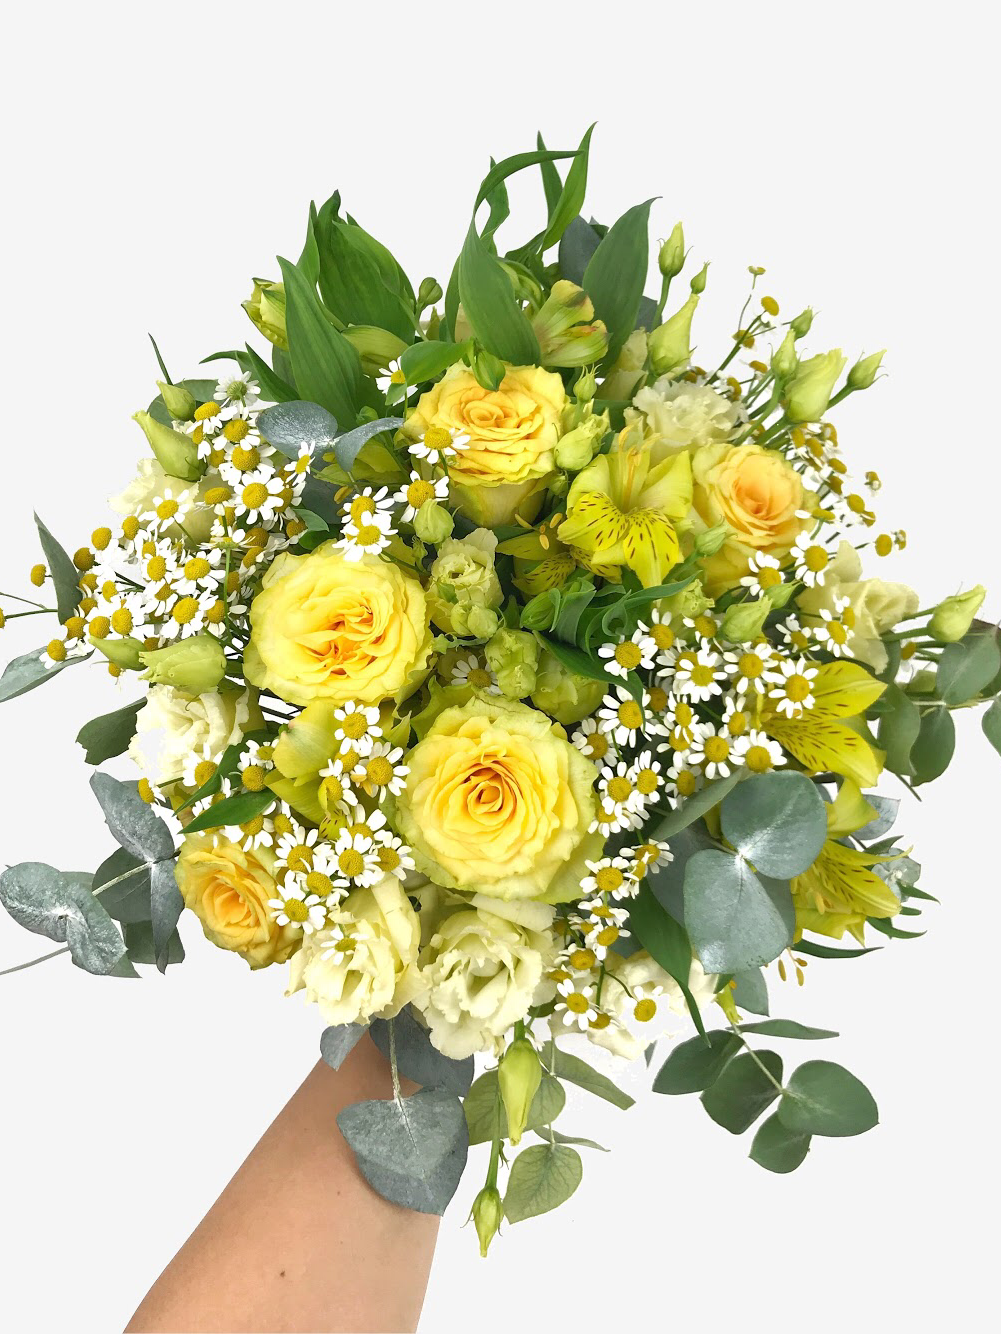 Sending a bouquet of yellow flowers - Large yellow 